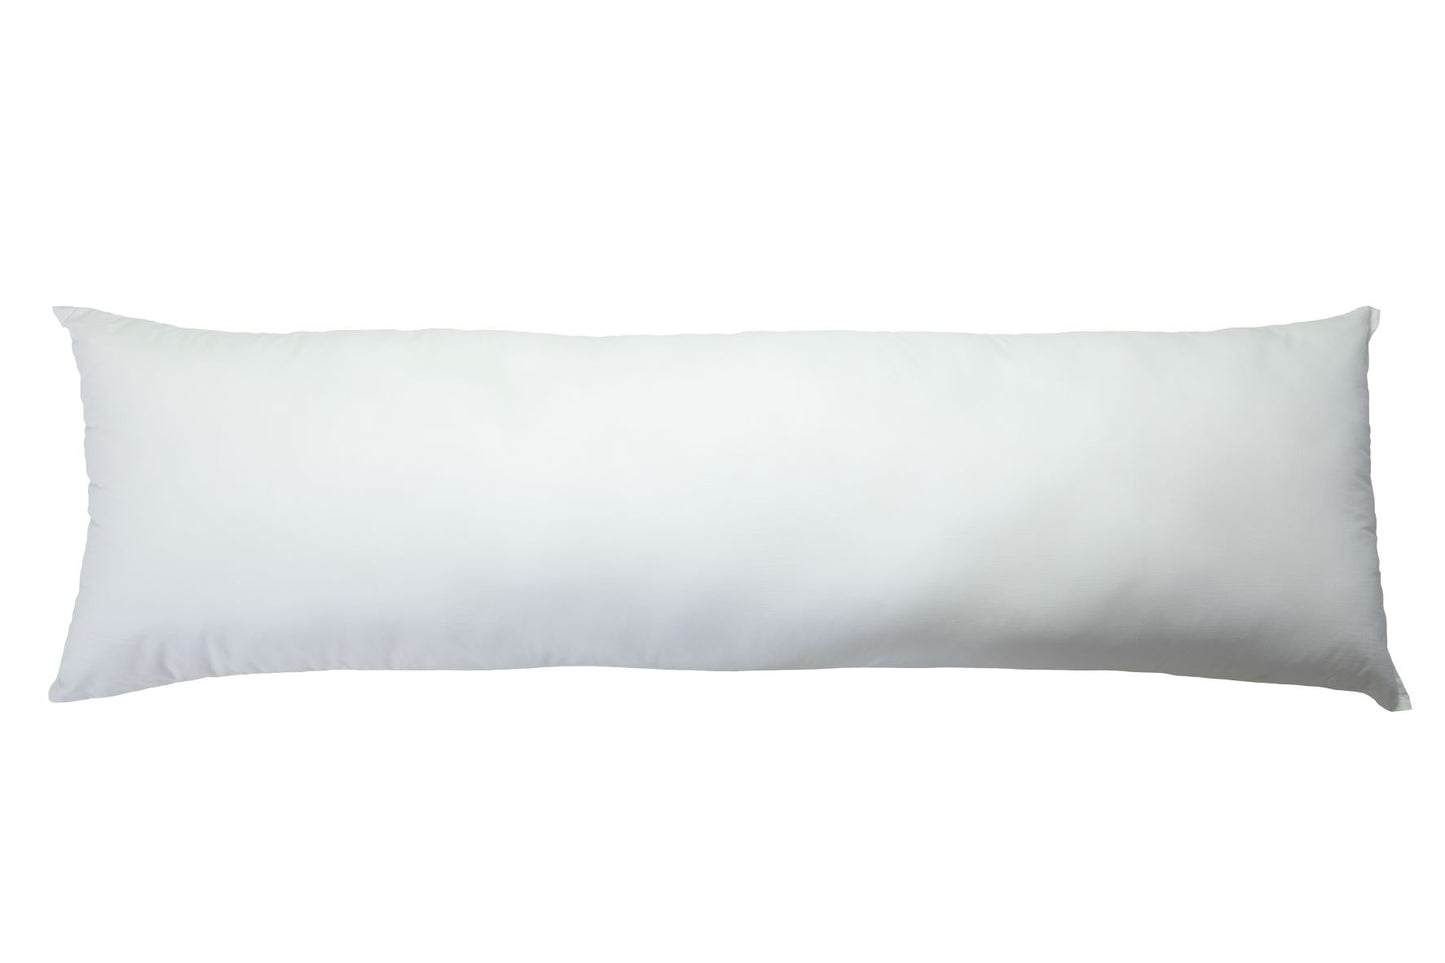 Body Pillow and Cover Special